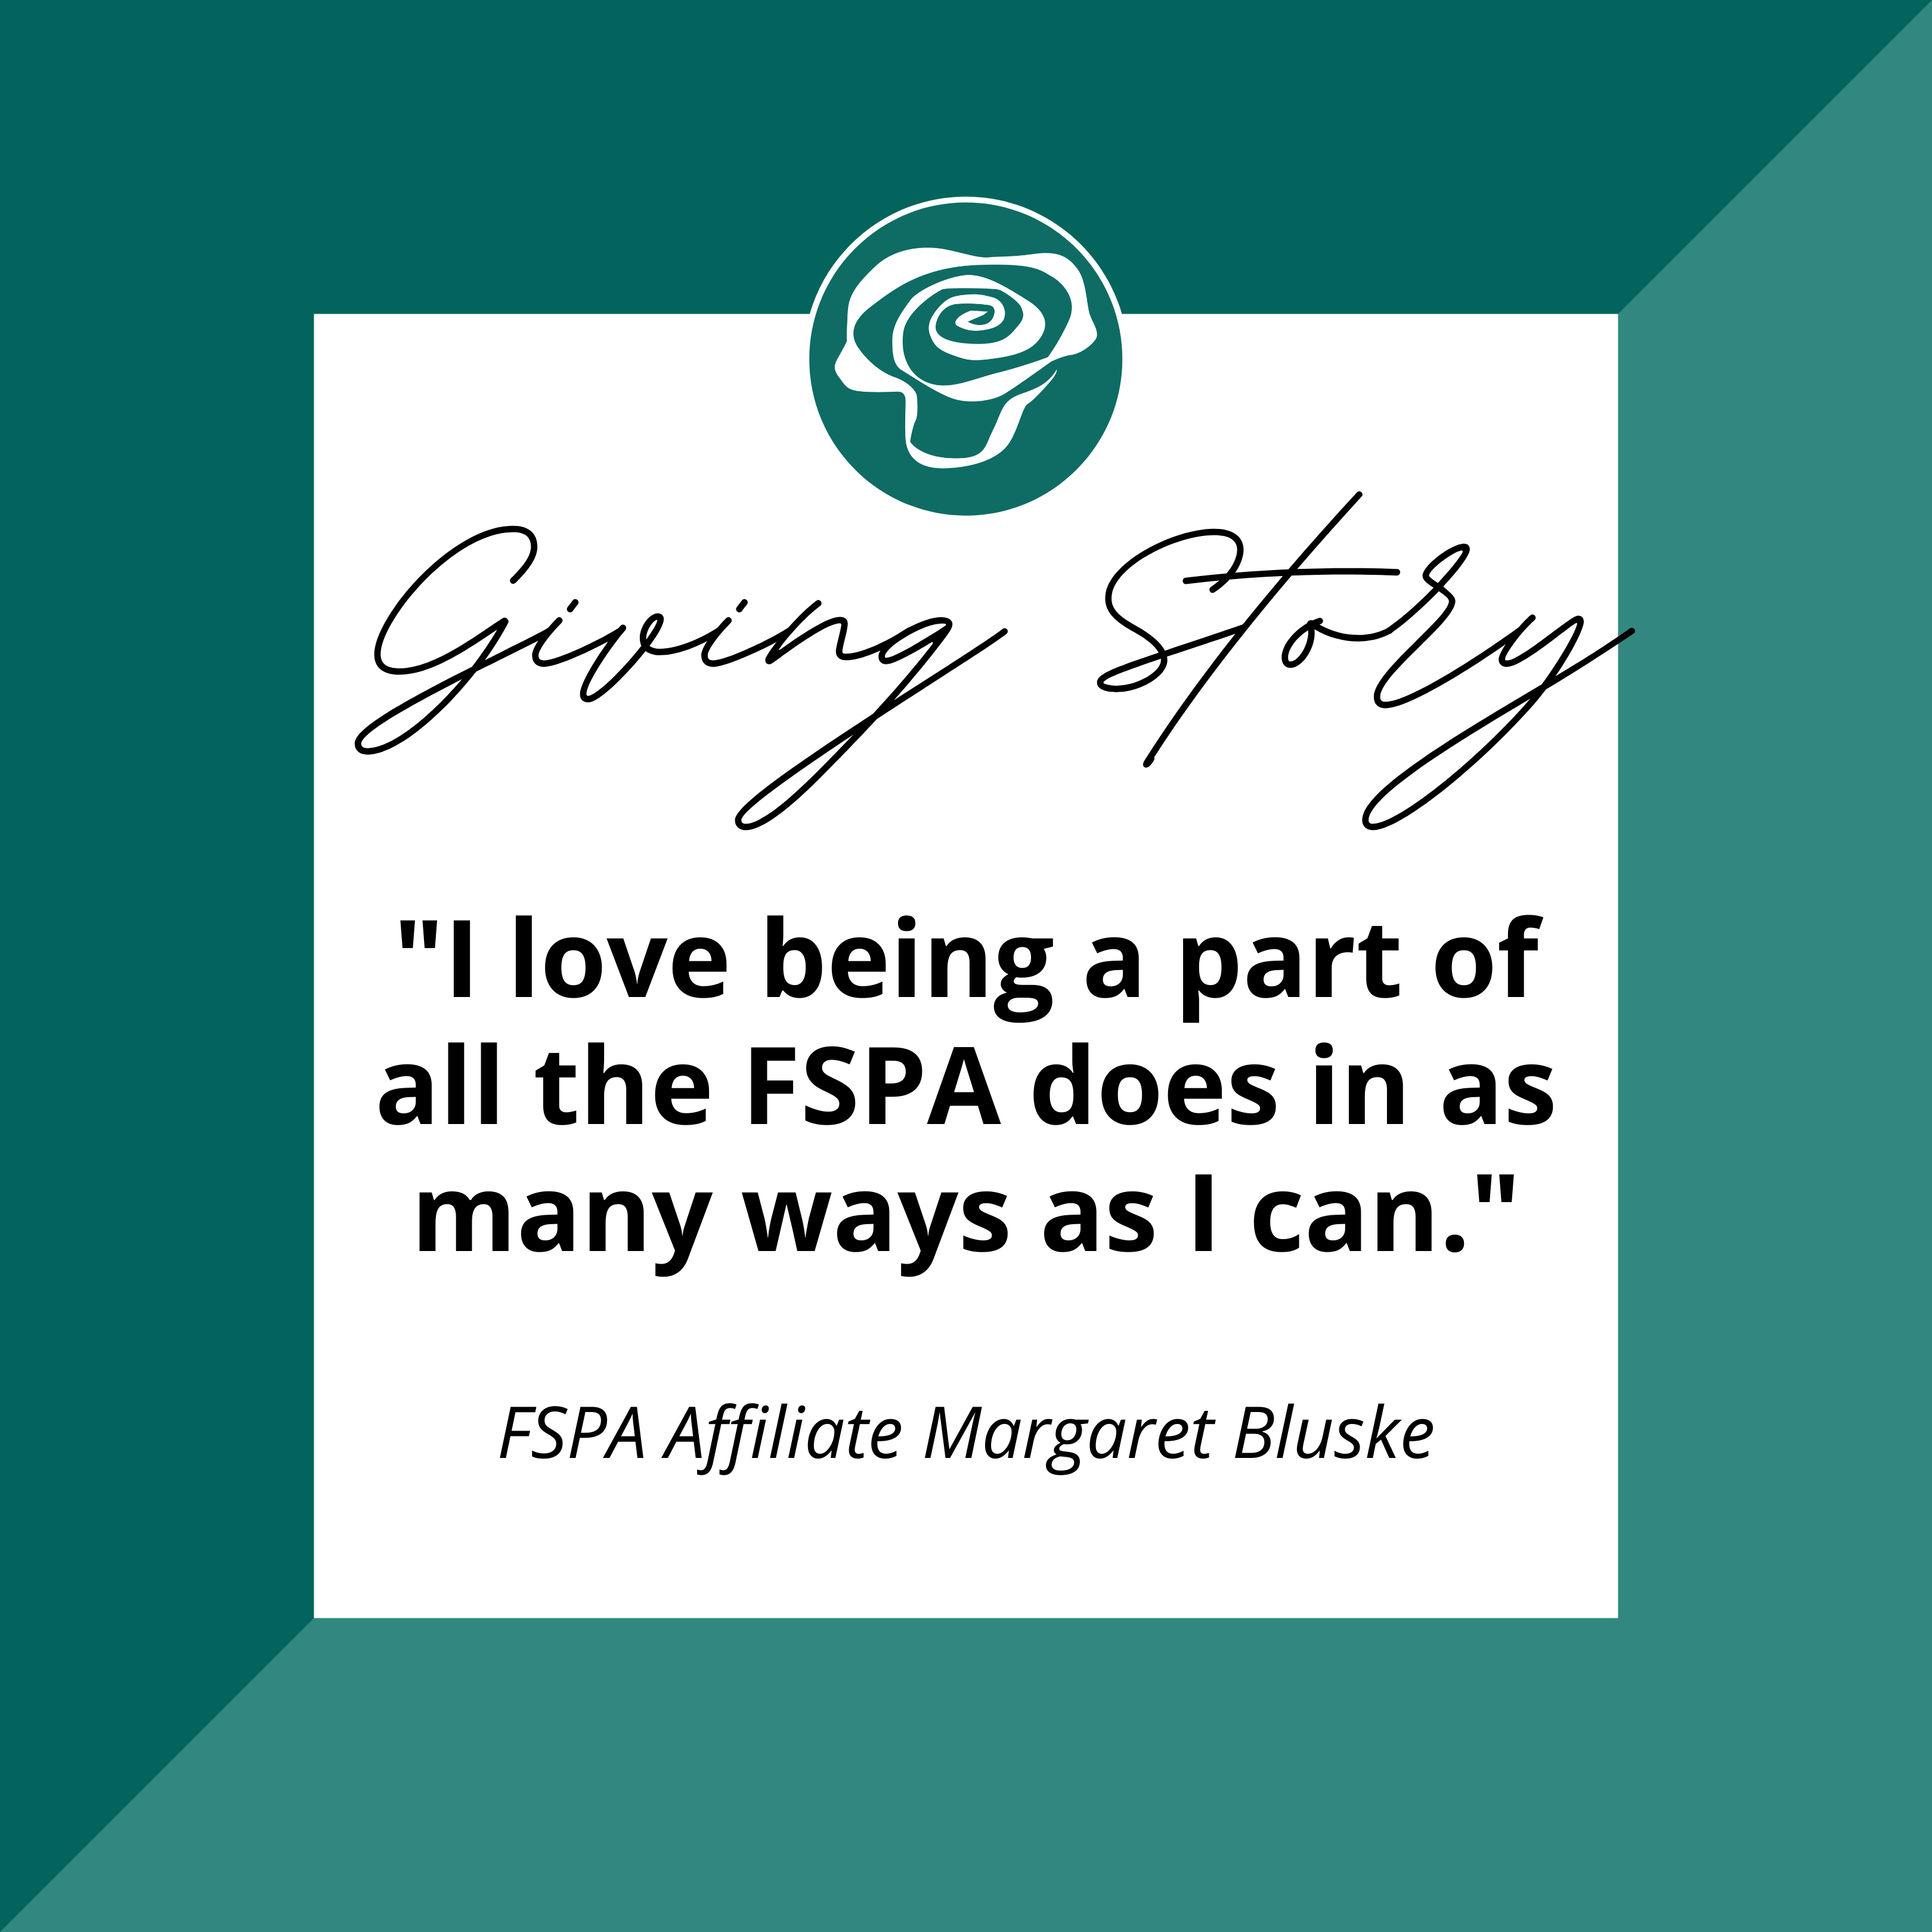 Giving Story I love being a part of all the FSPA does in as many ways as I can says FSPA Affiliate Margaret Bluske